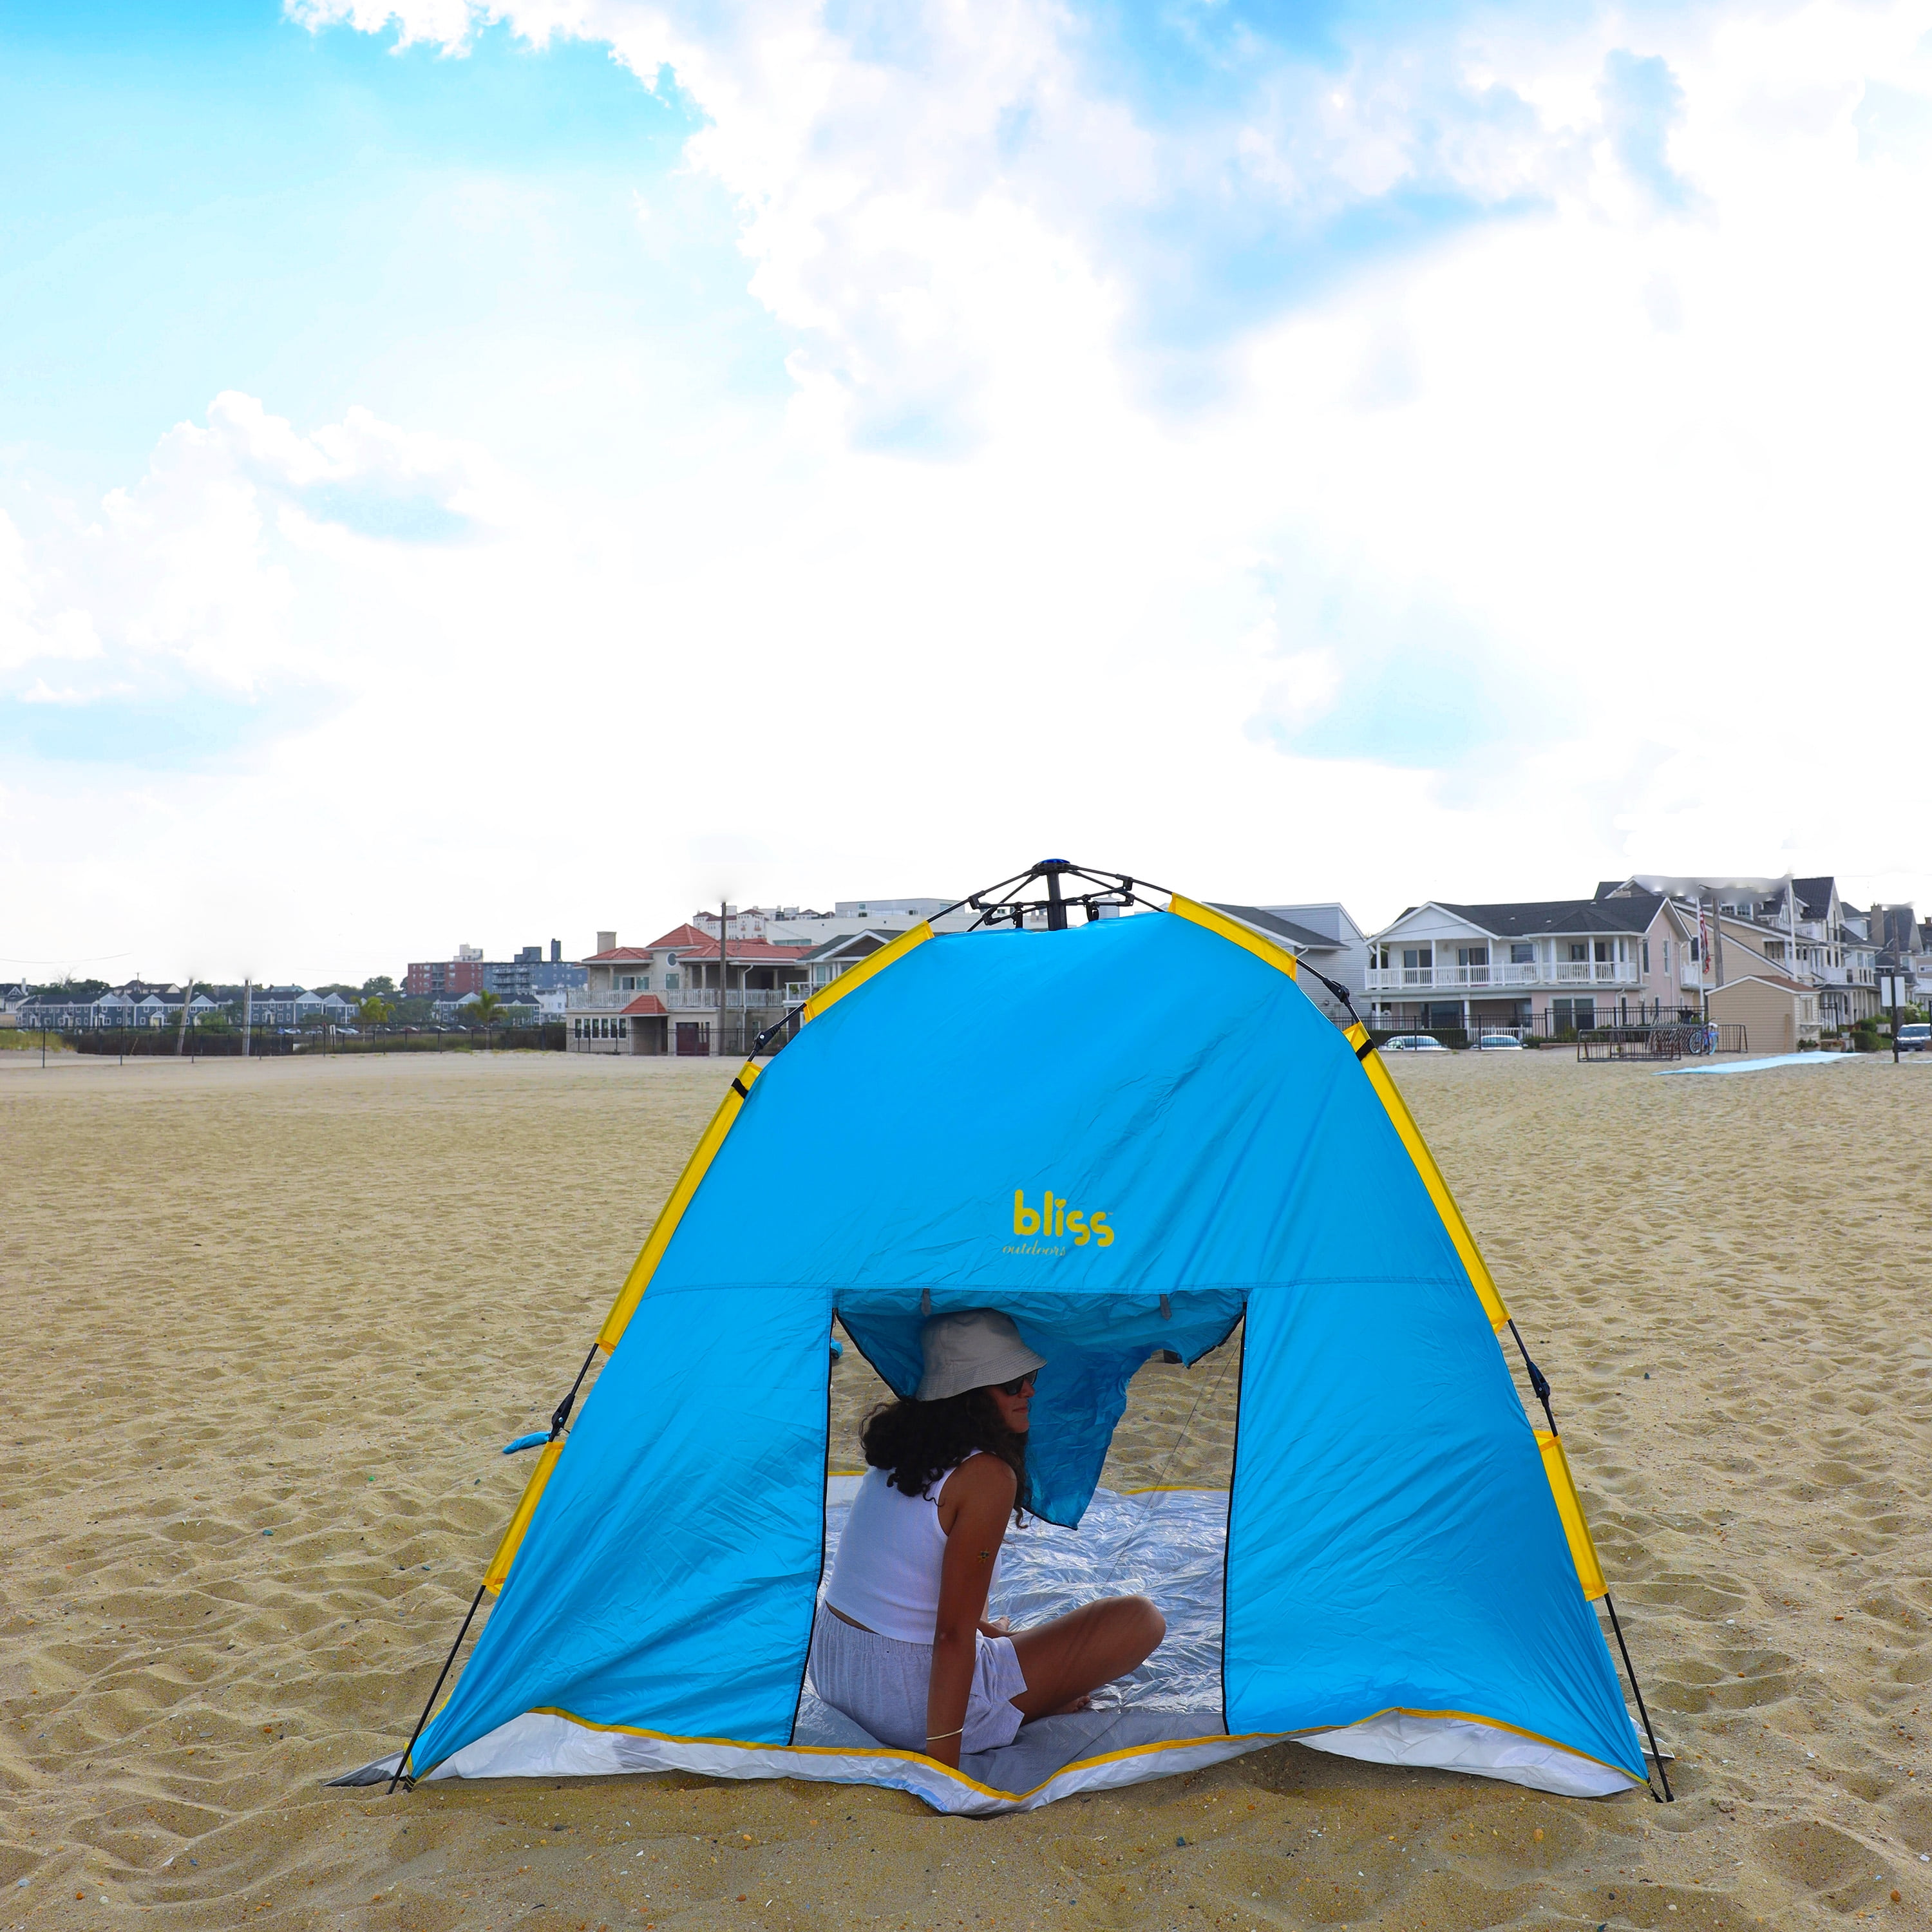 Bliss Hammocks Pop-up Collapsible Beach Tent with Carry Bag, Wind